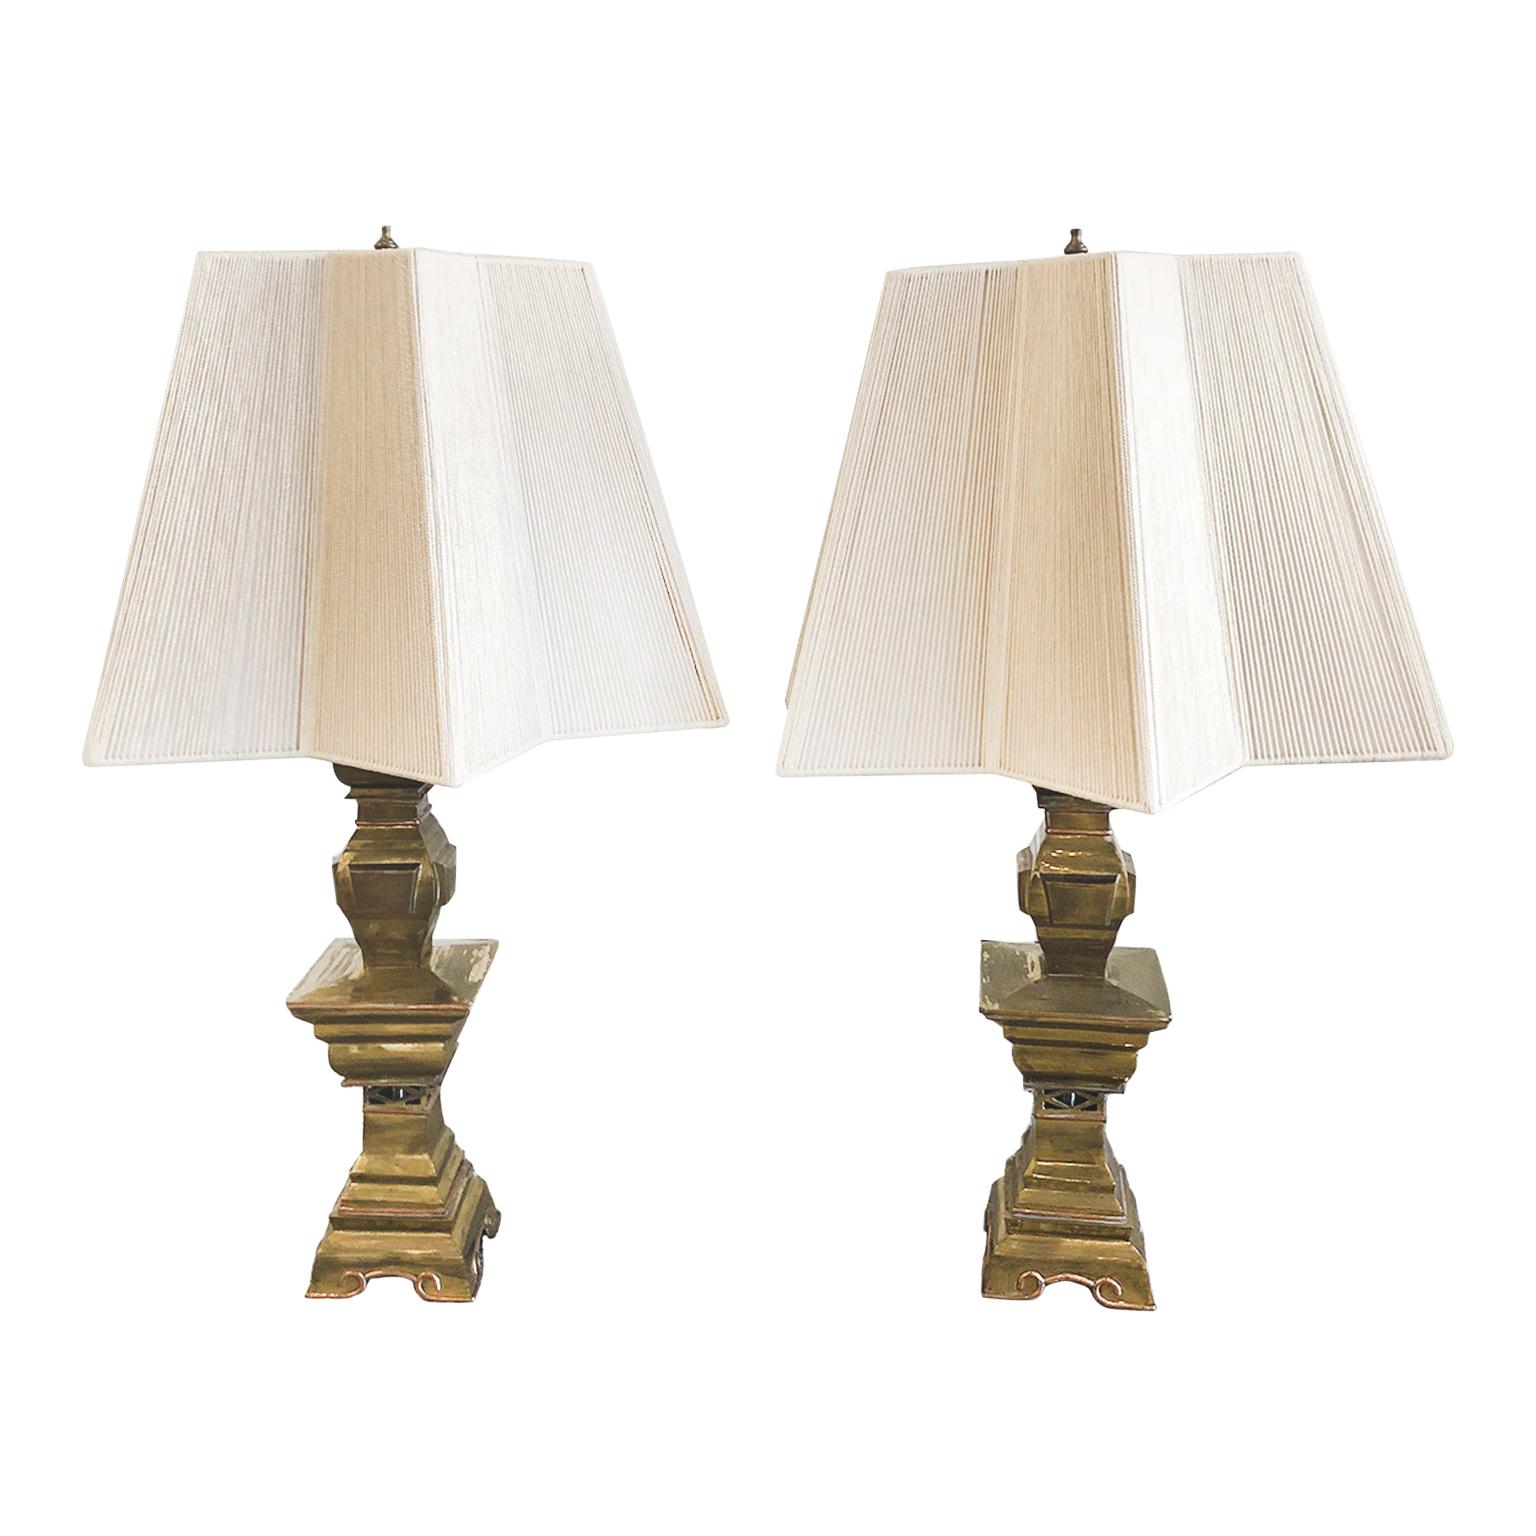 Pair of Mid-20th Century Brass Candlestick Lamps For Sale